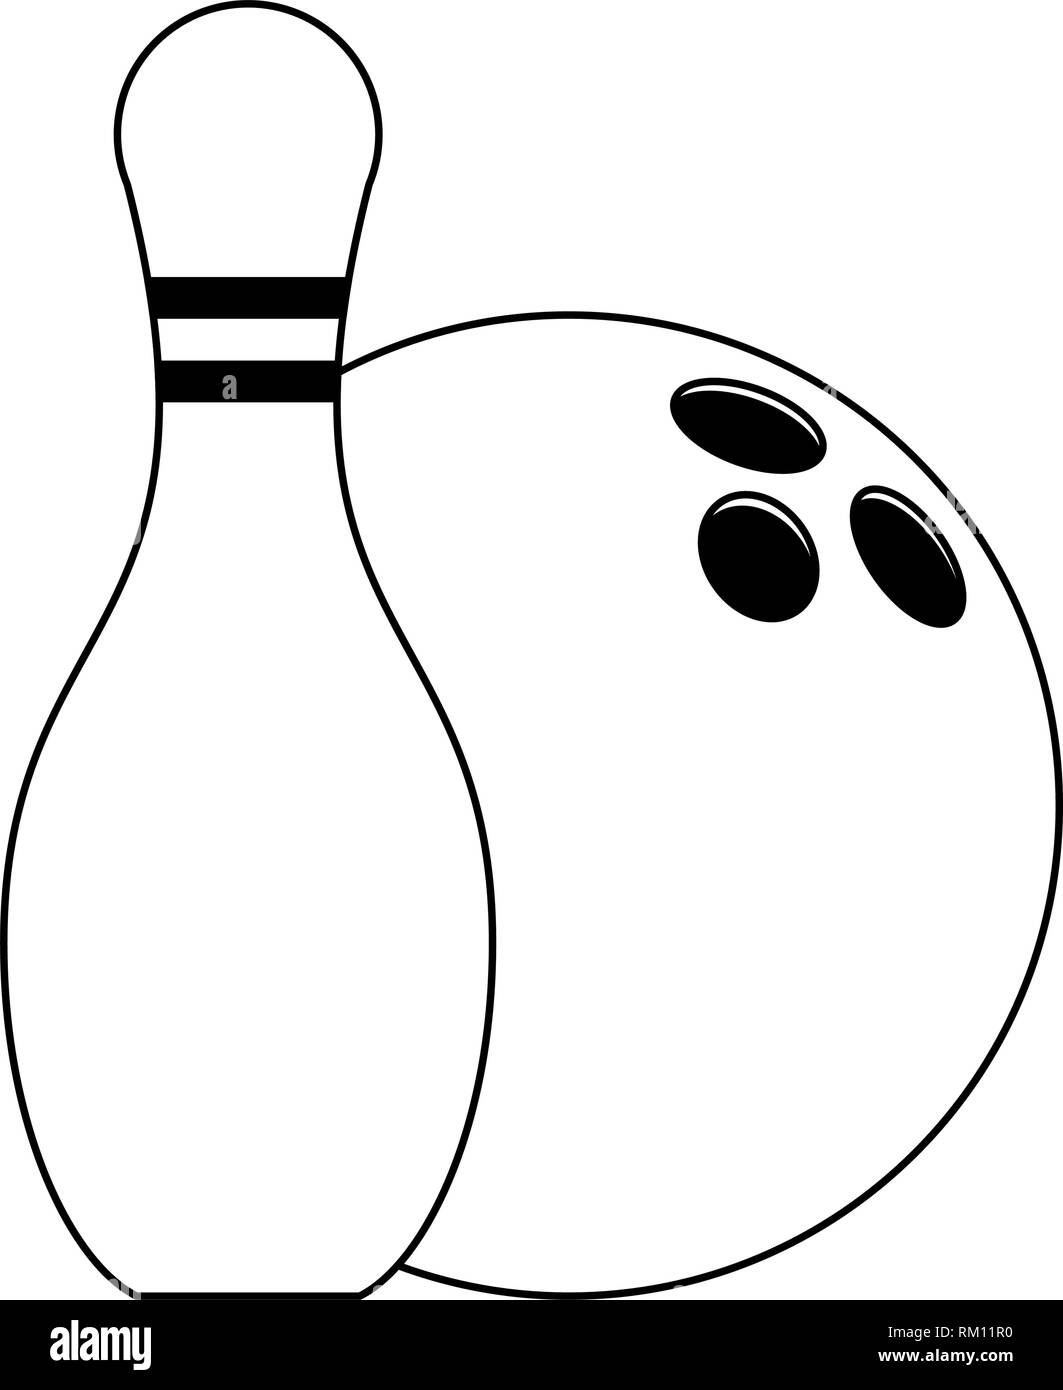 Bowling pin and ball cartoon in black and white Stock Vector